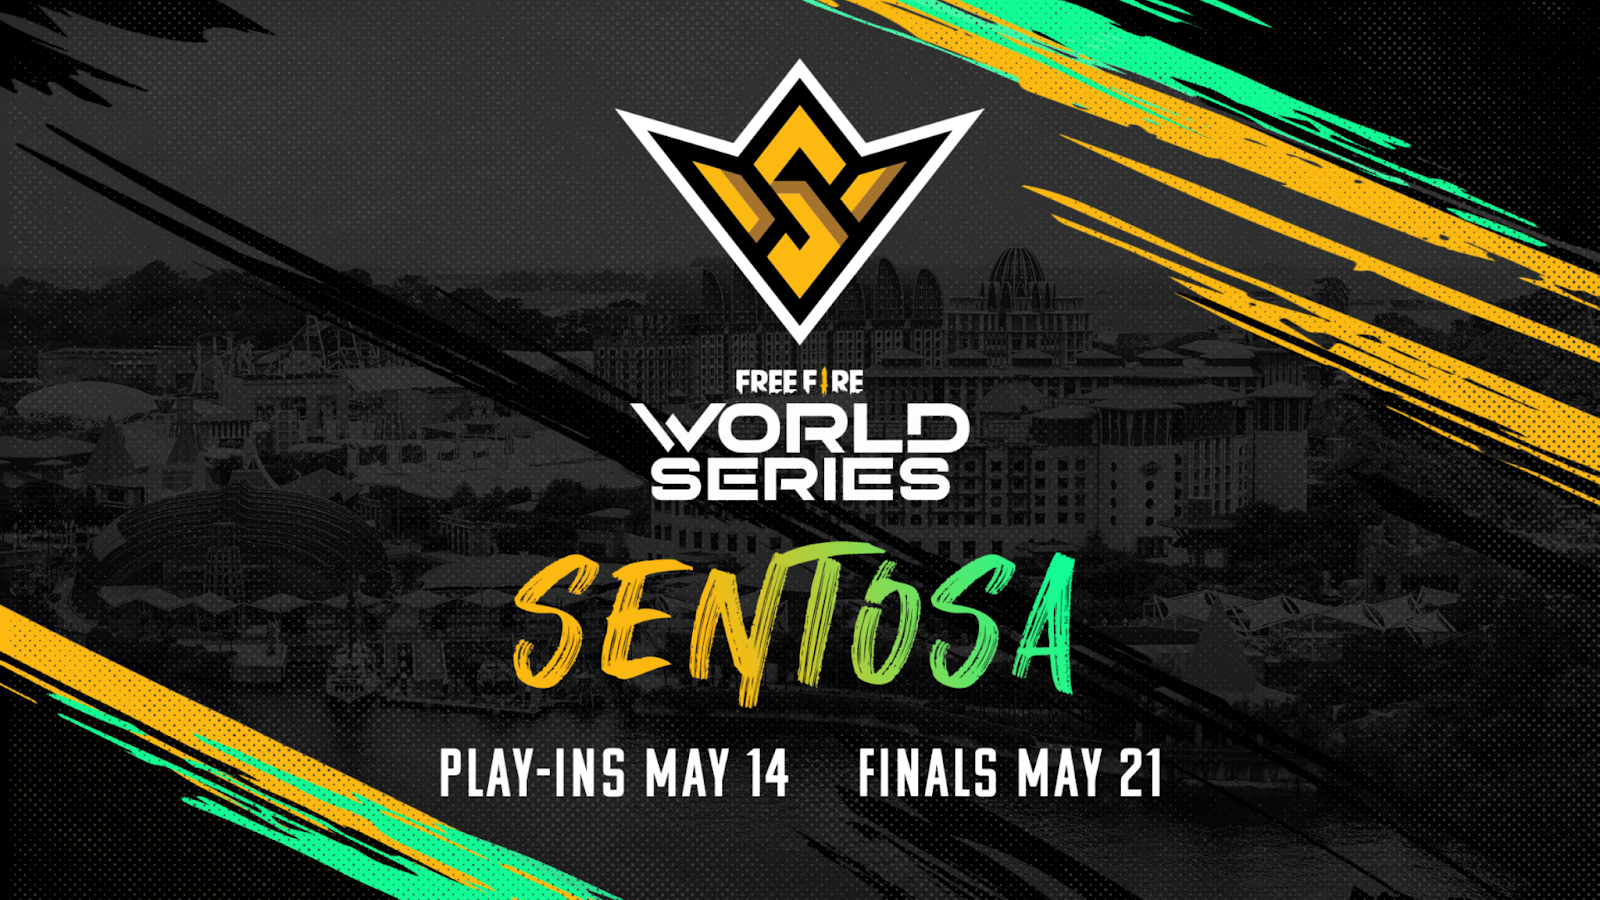 How to watch the Free Fire World Series (FFWS) Sentosa 2022 play-in stage